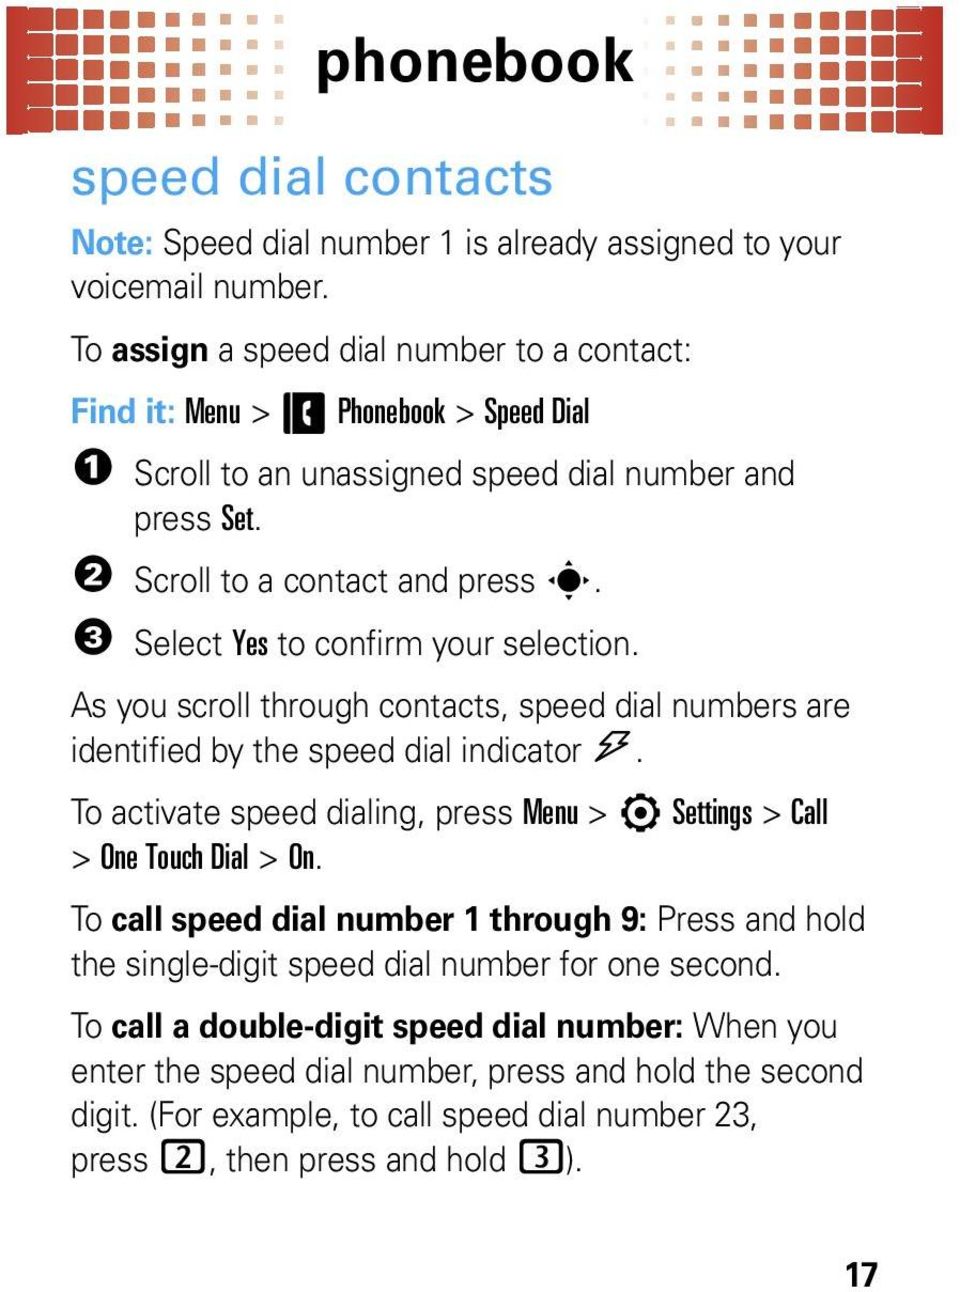 3 Select Yes to confirm your selection. As you scroll through contacts, speed dial numbers are identified by the speed dial indicator >.